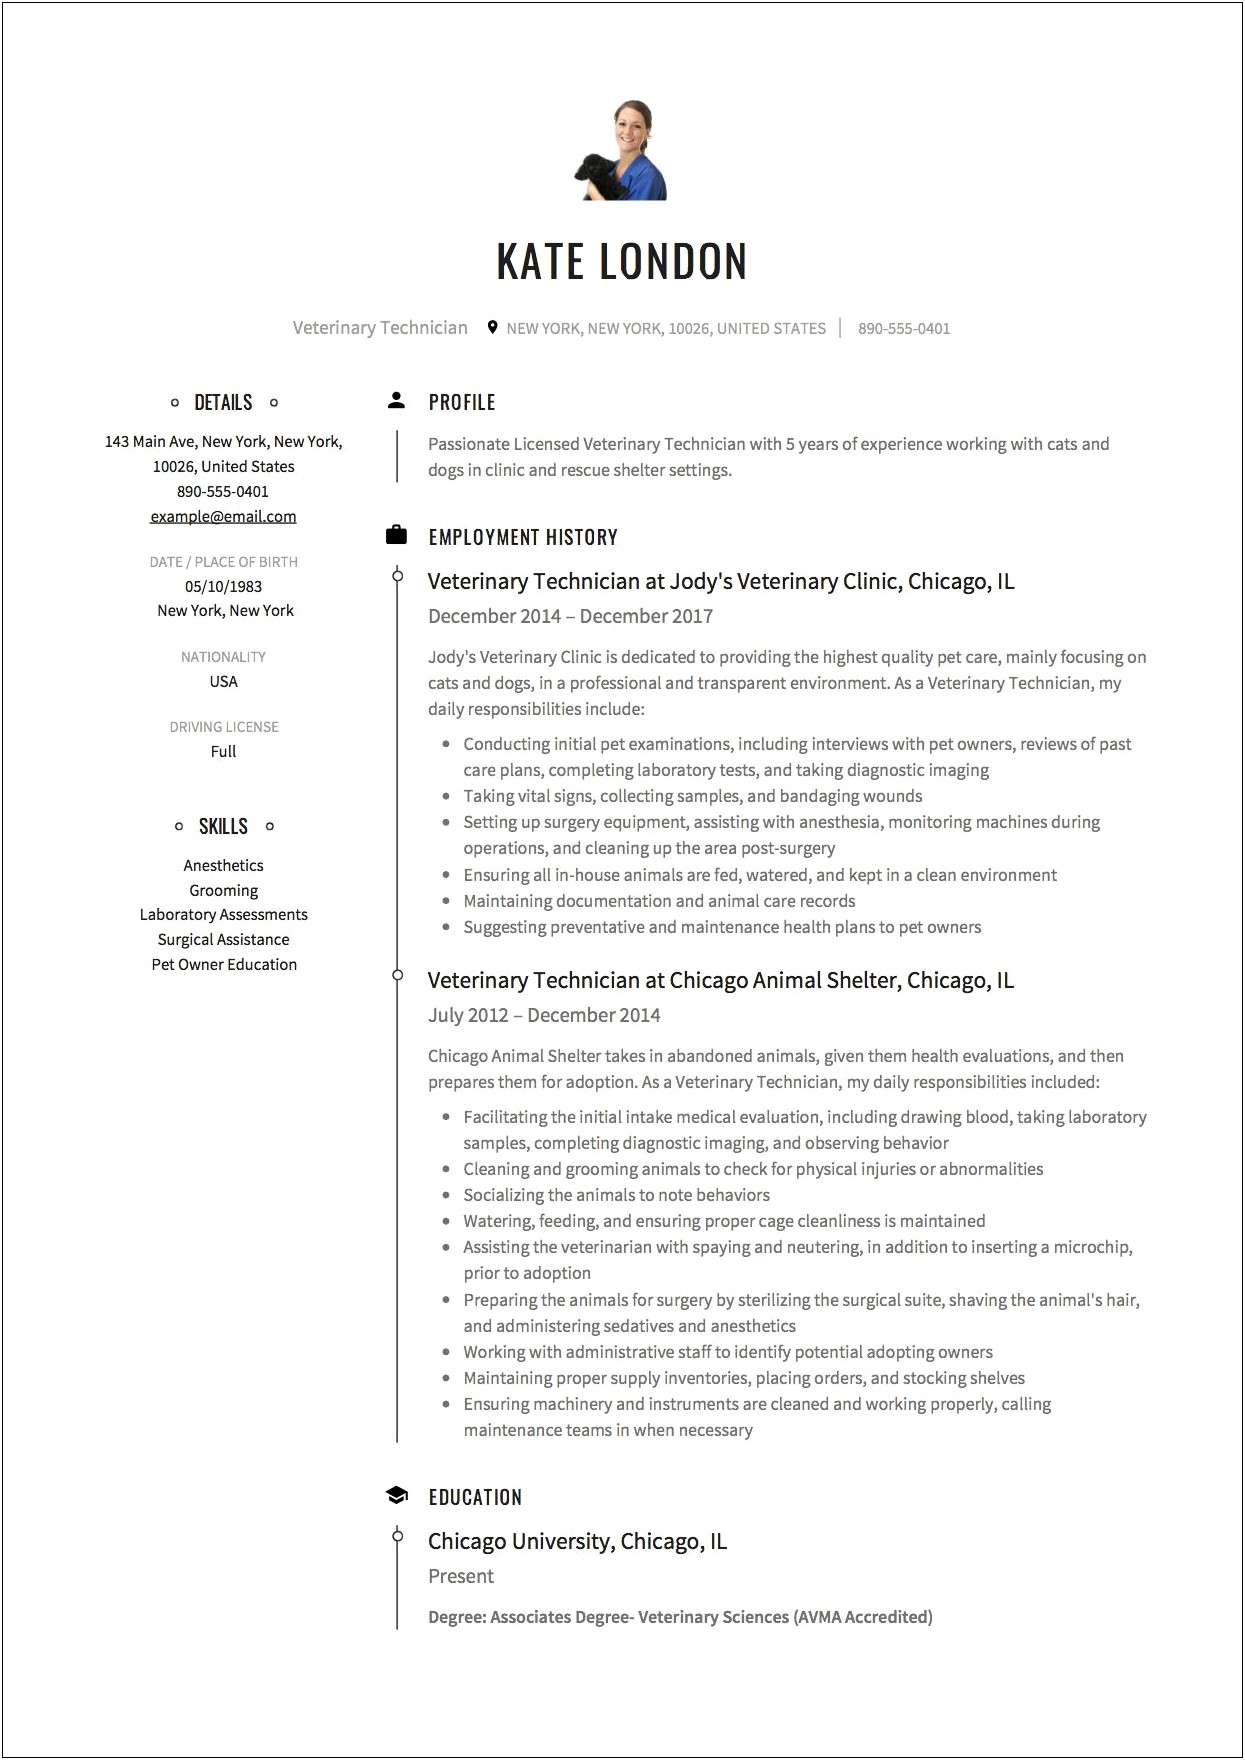 Resume Cover Letter Template For Surgical Technologist